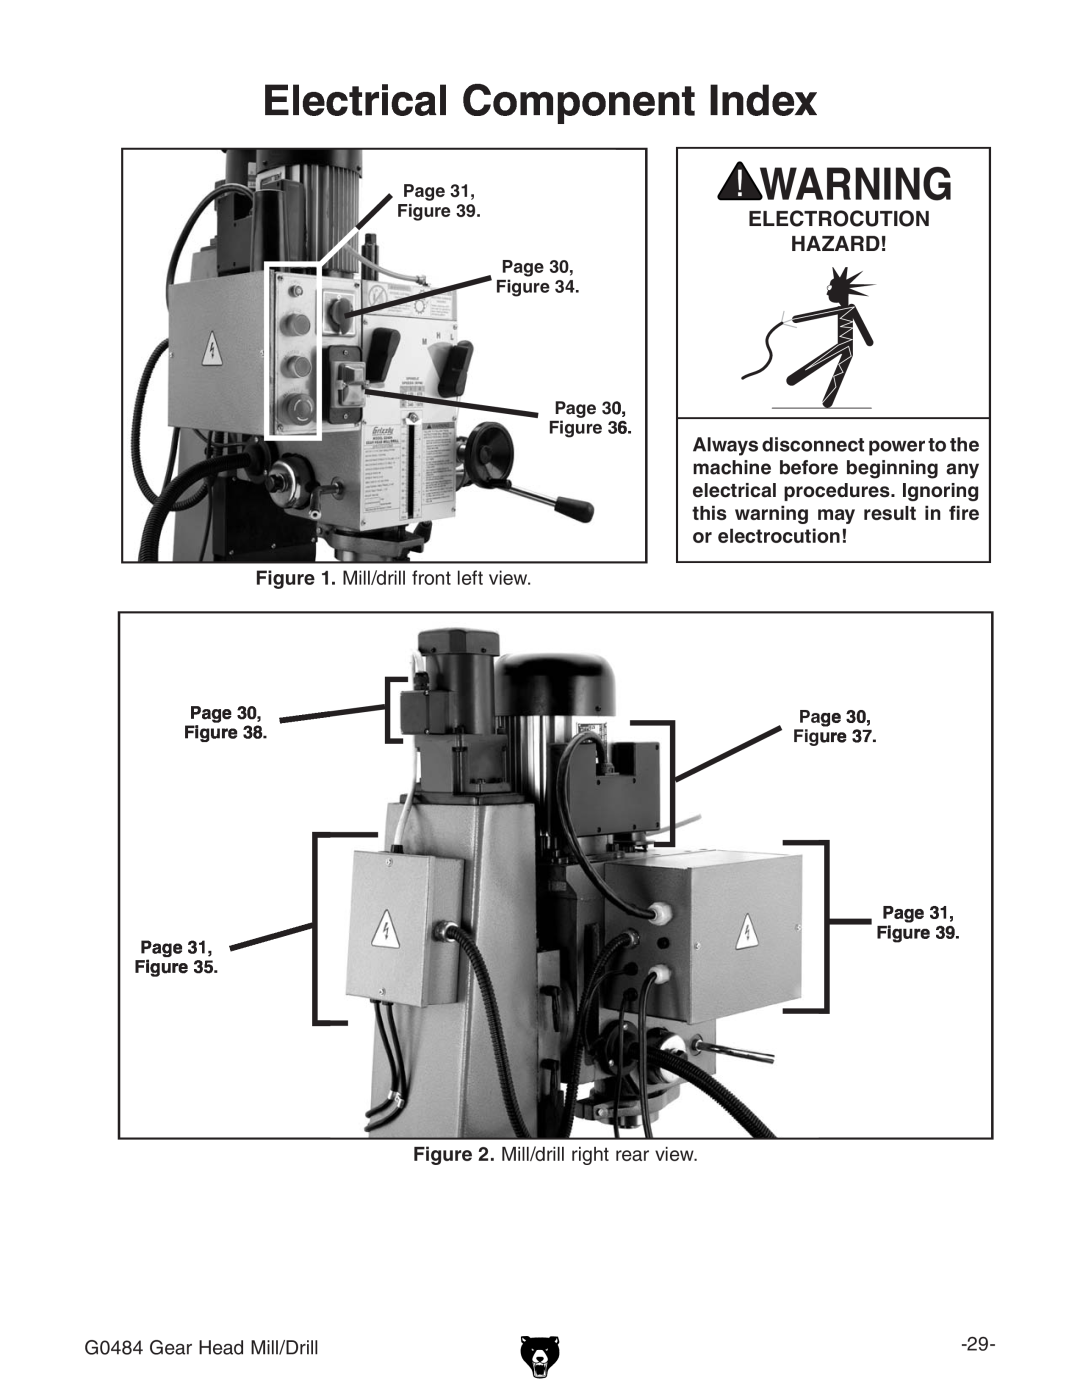 Grizzly G0484 owner manual Electrical Component Index, Electrocution Hazard, Page 